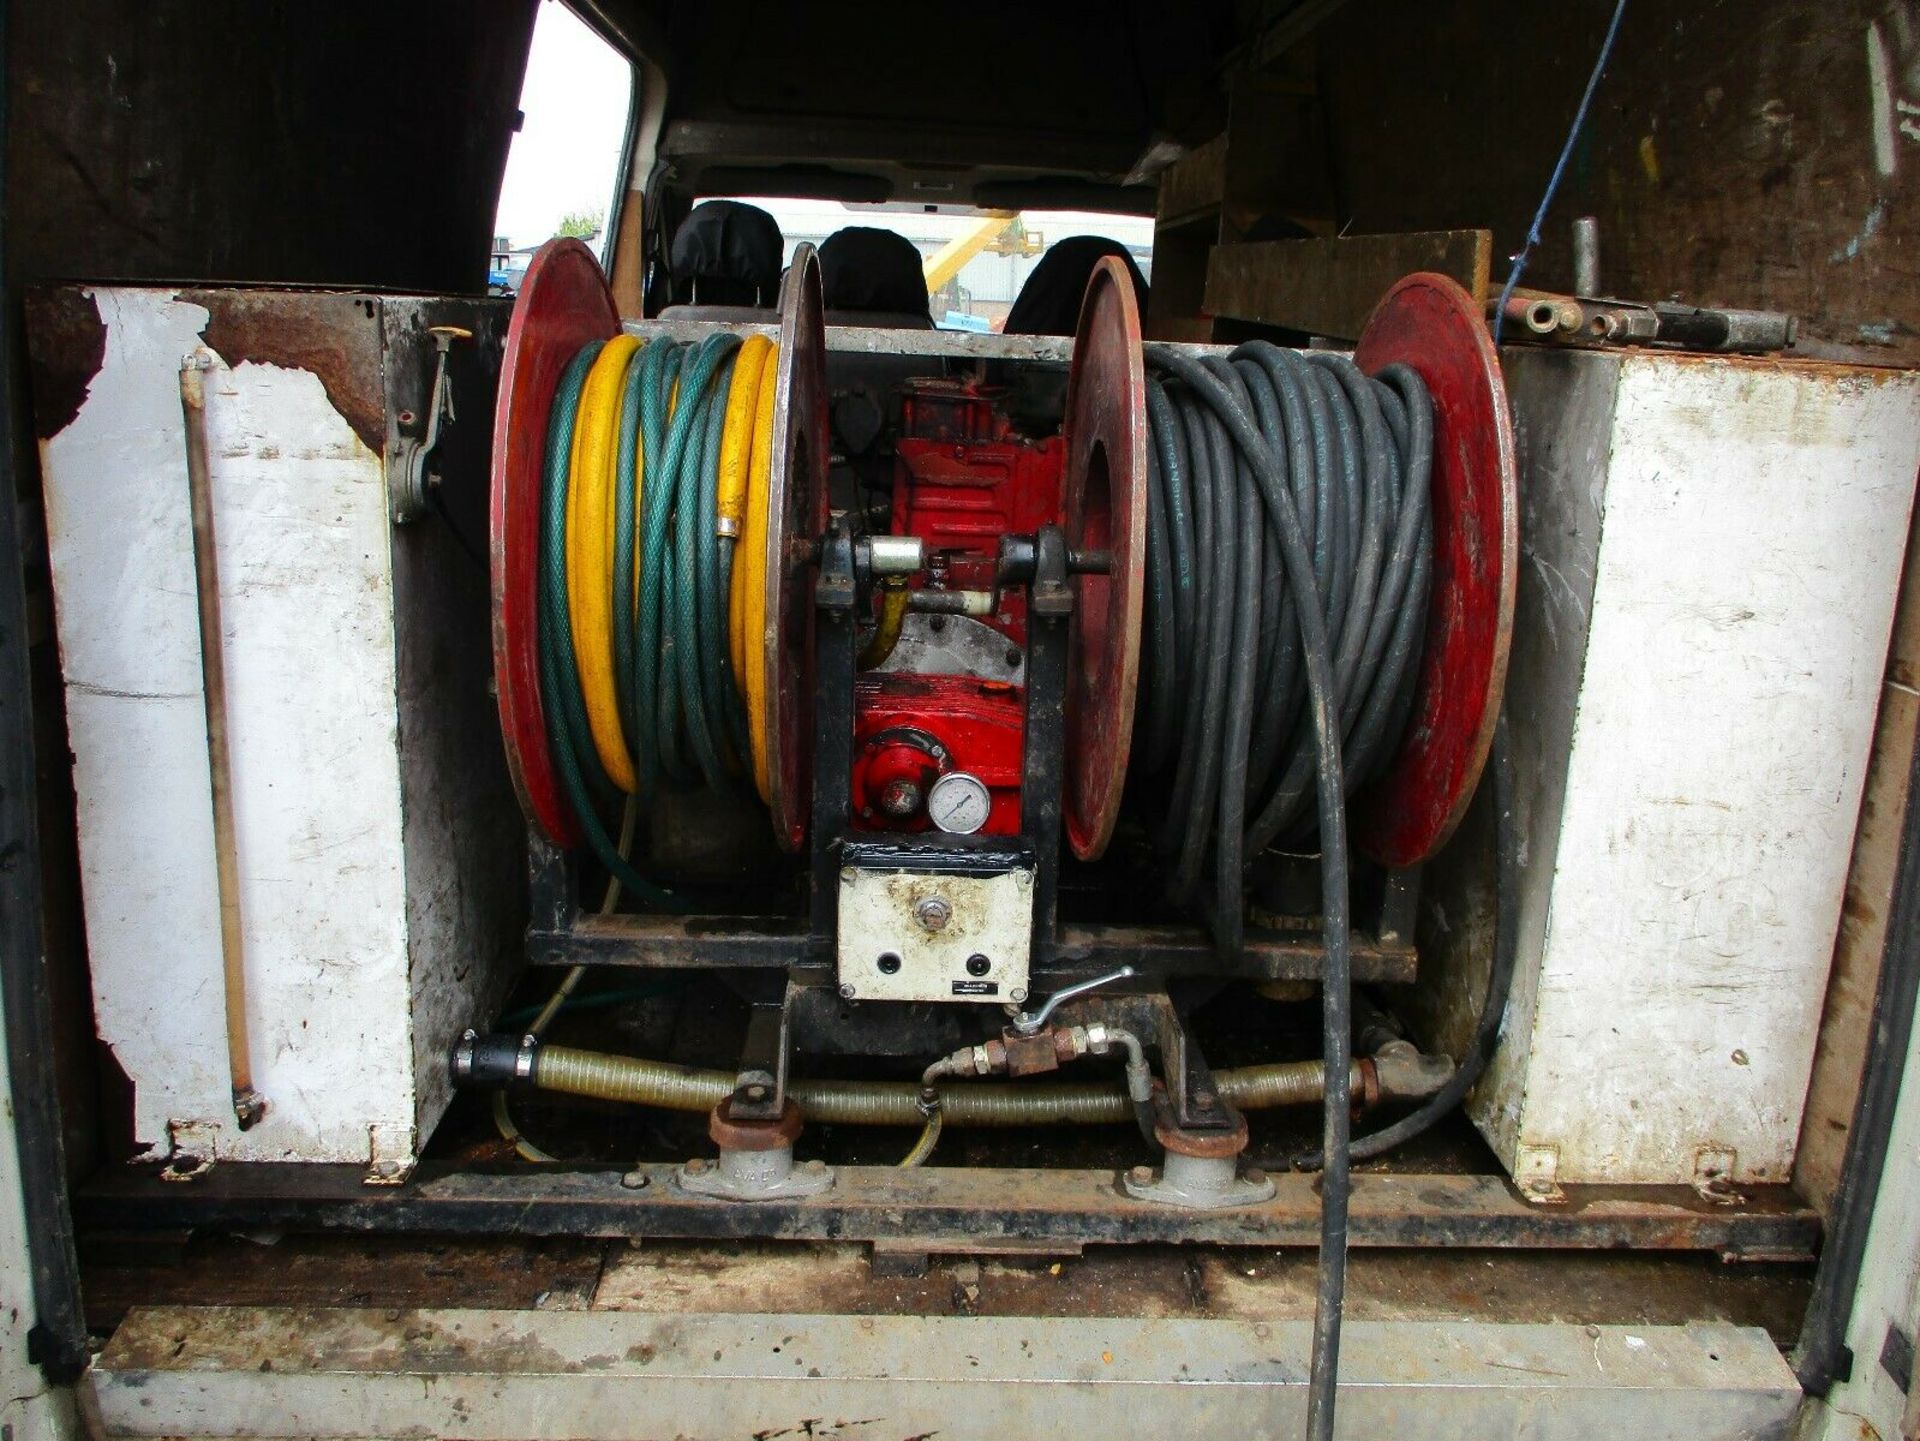 Lister Petter Diesel Engined Drain Jetter Pressure Washer - Image 7 of 7